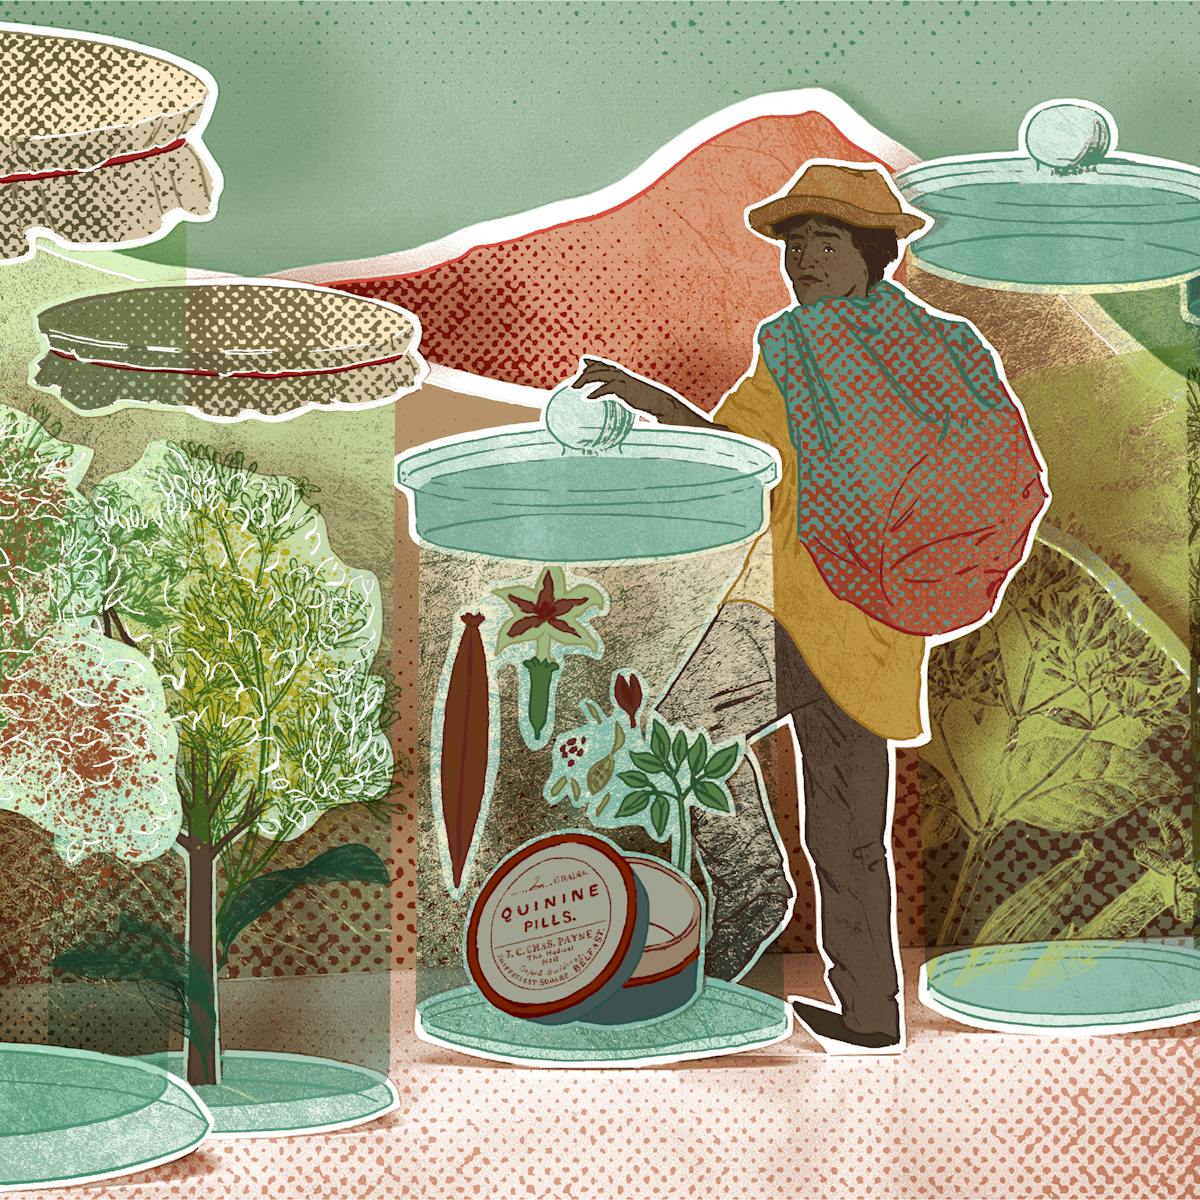 Photograph of a papercut 3D artwork. A man wearing a hat is shown standing between six large glass jars, each containing a different kind of plant. There are red mountains in the background. 